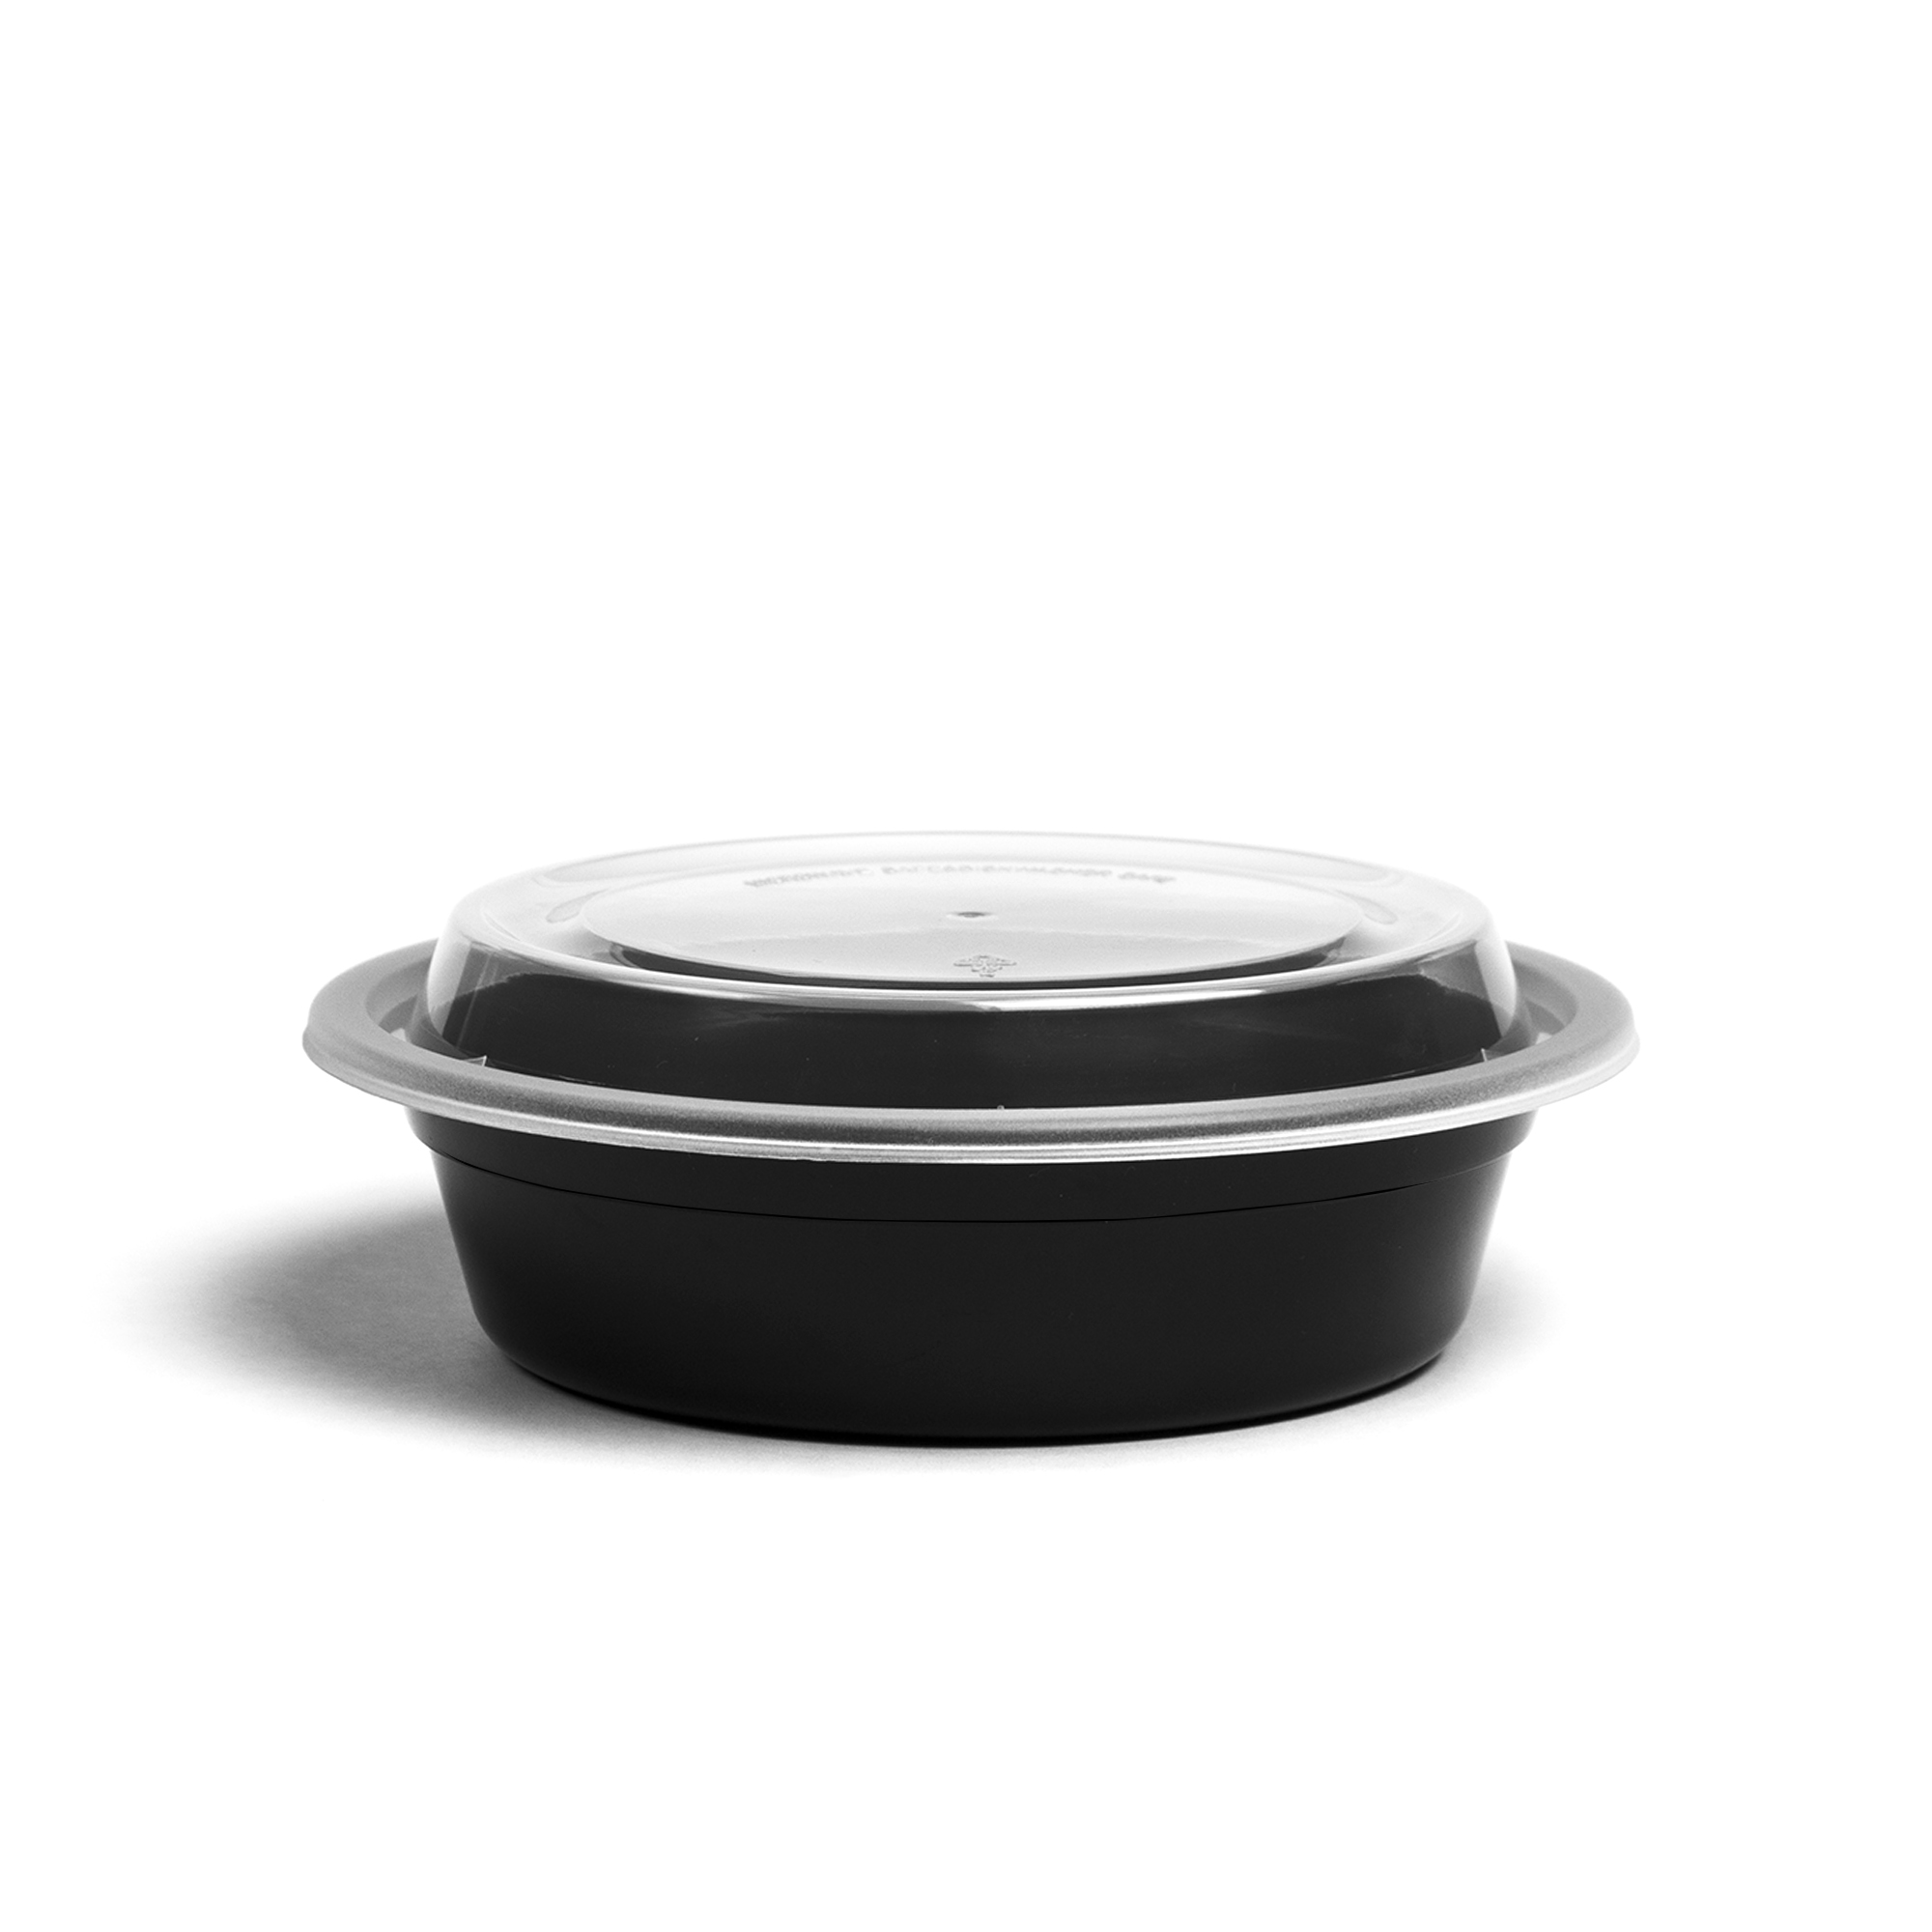 Plastic Food Containers: Meal Prep Containers Round 32oz Black